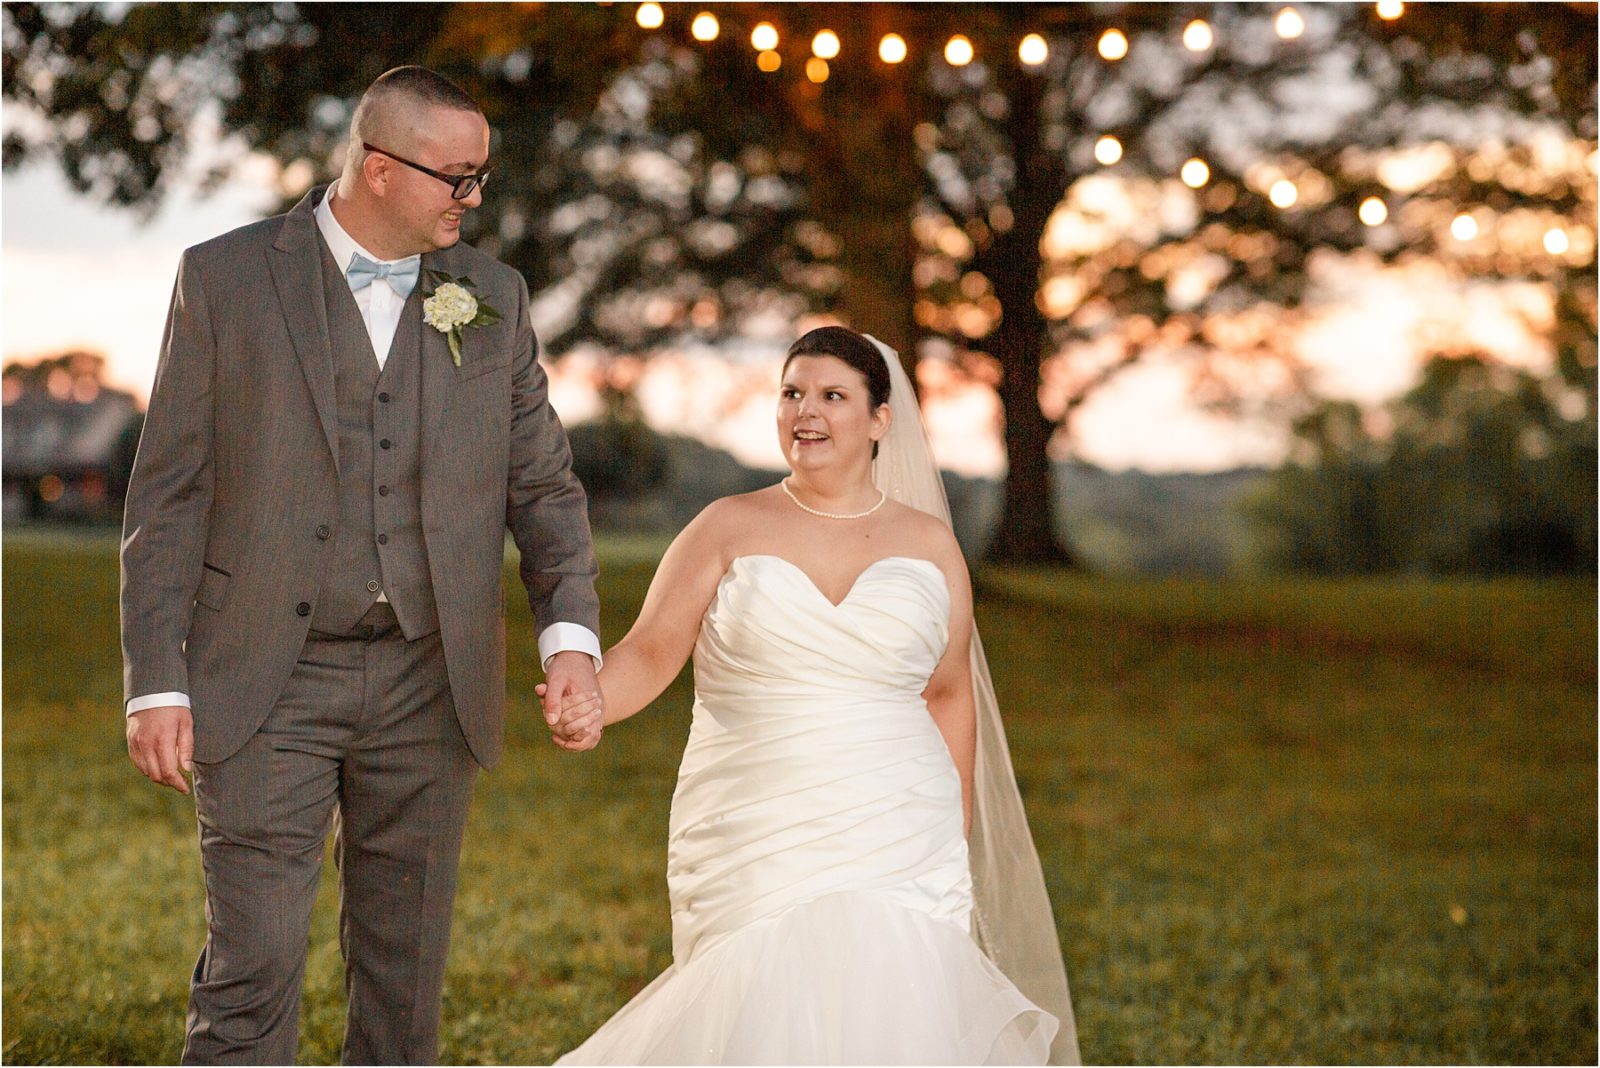 Just married couple walking under trees with string lights at barn wedding venue